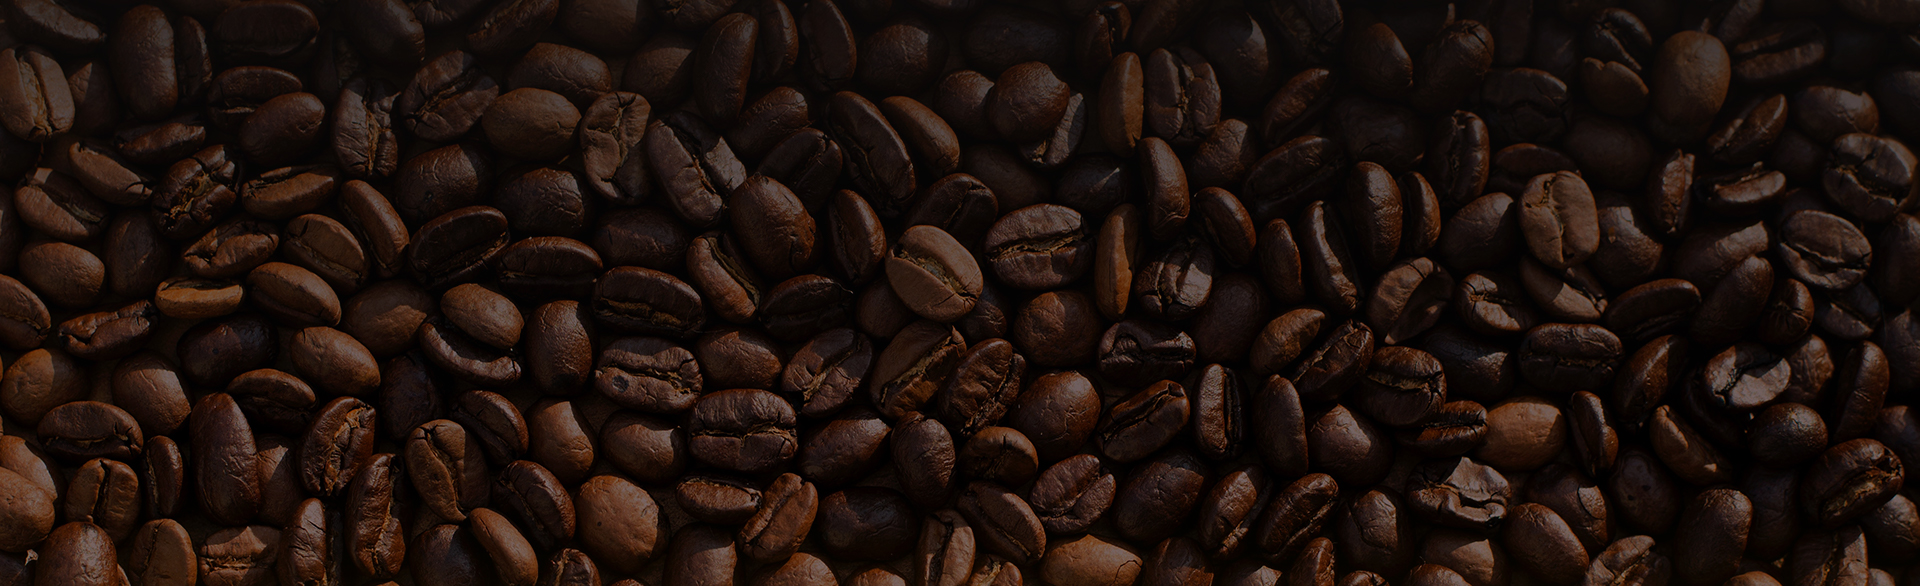 where to buy coffee beans in singapore